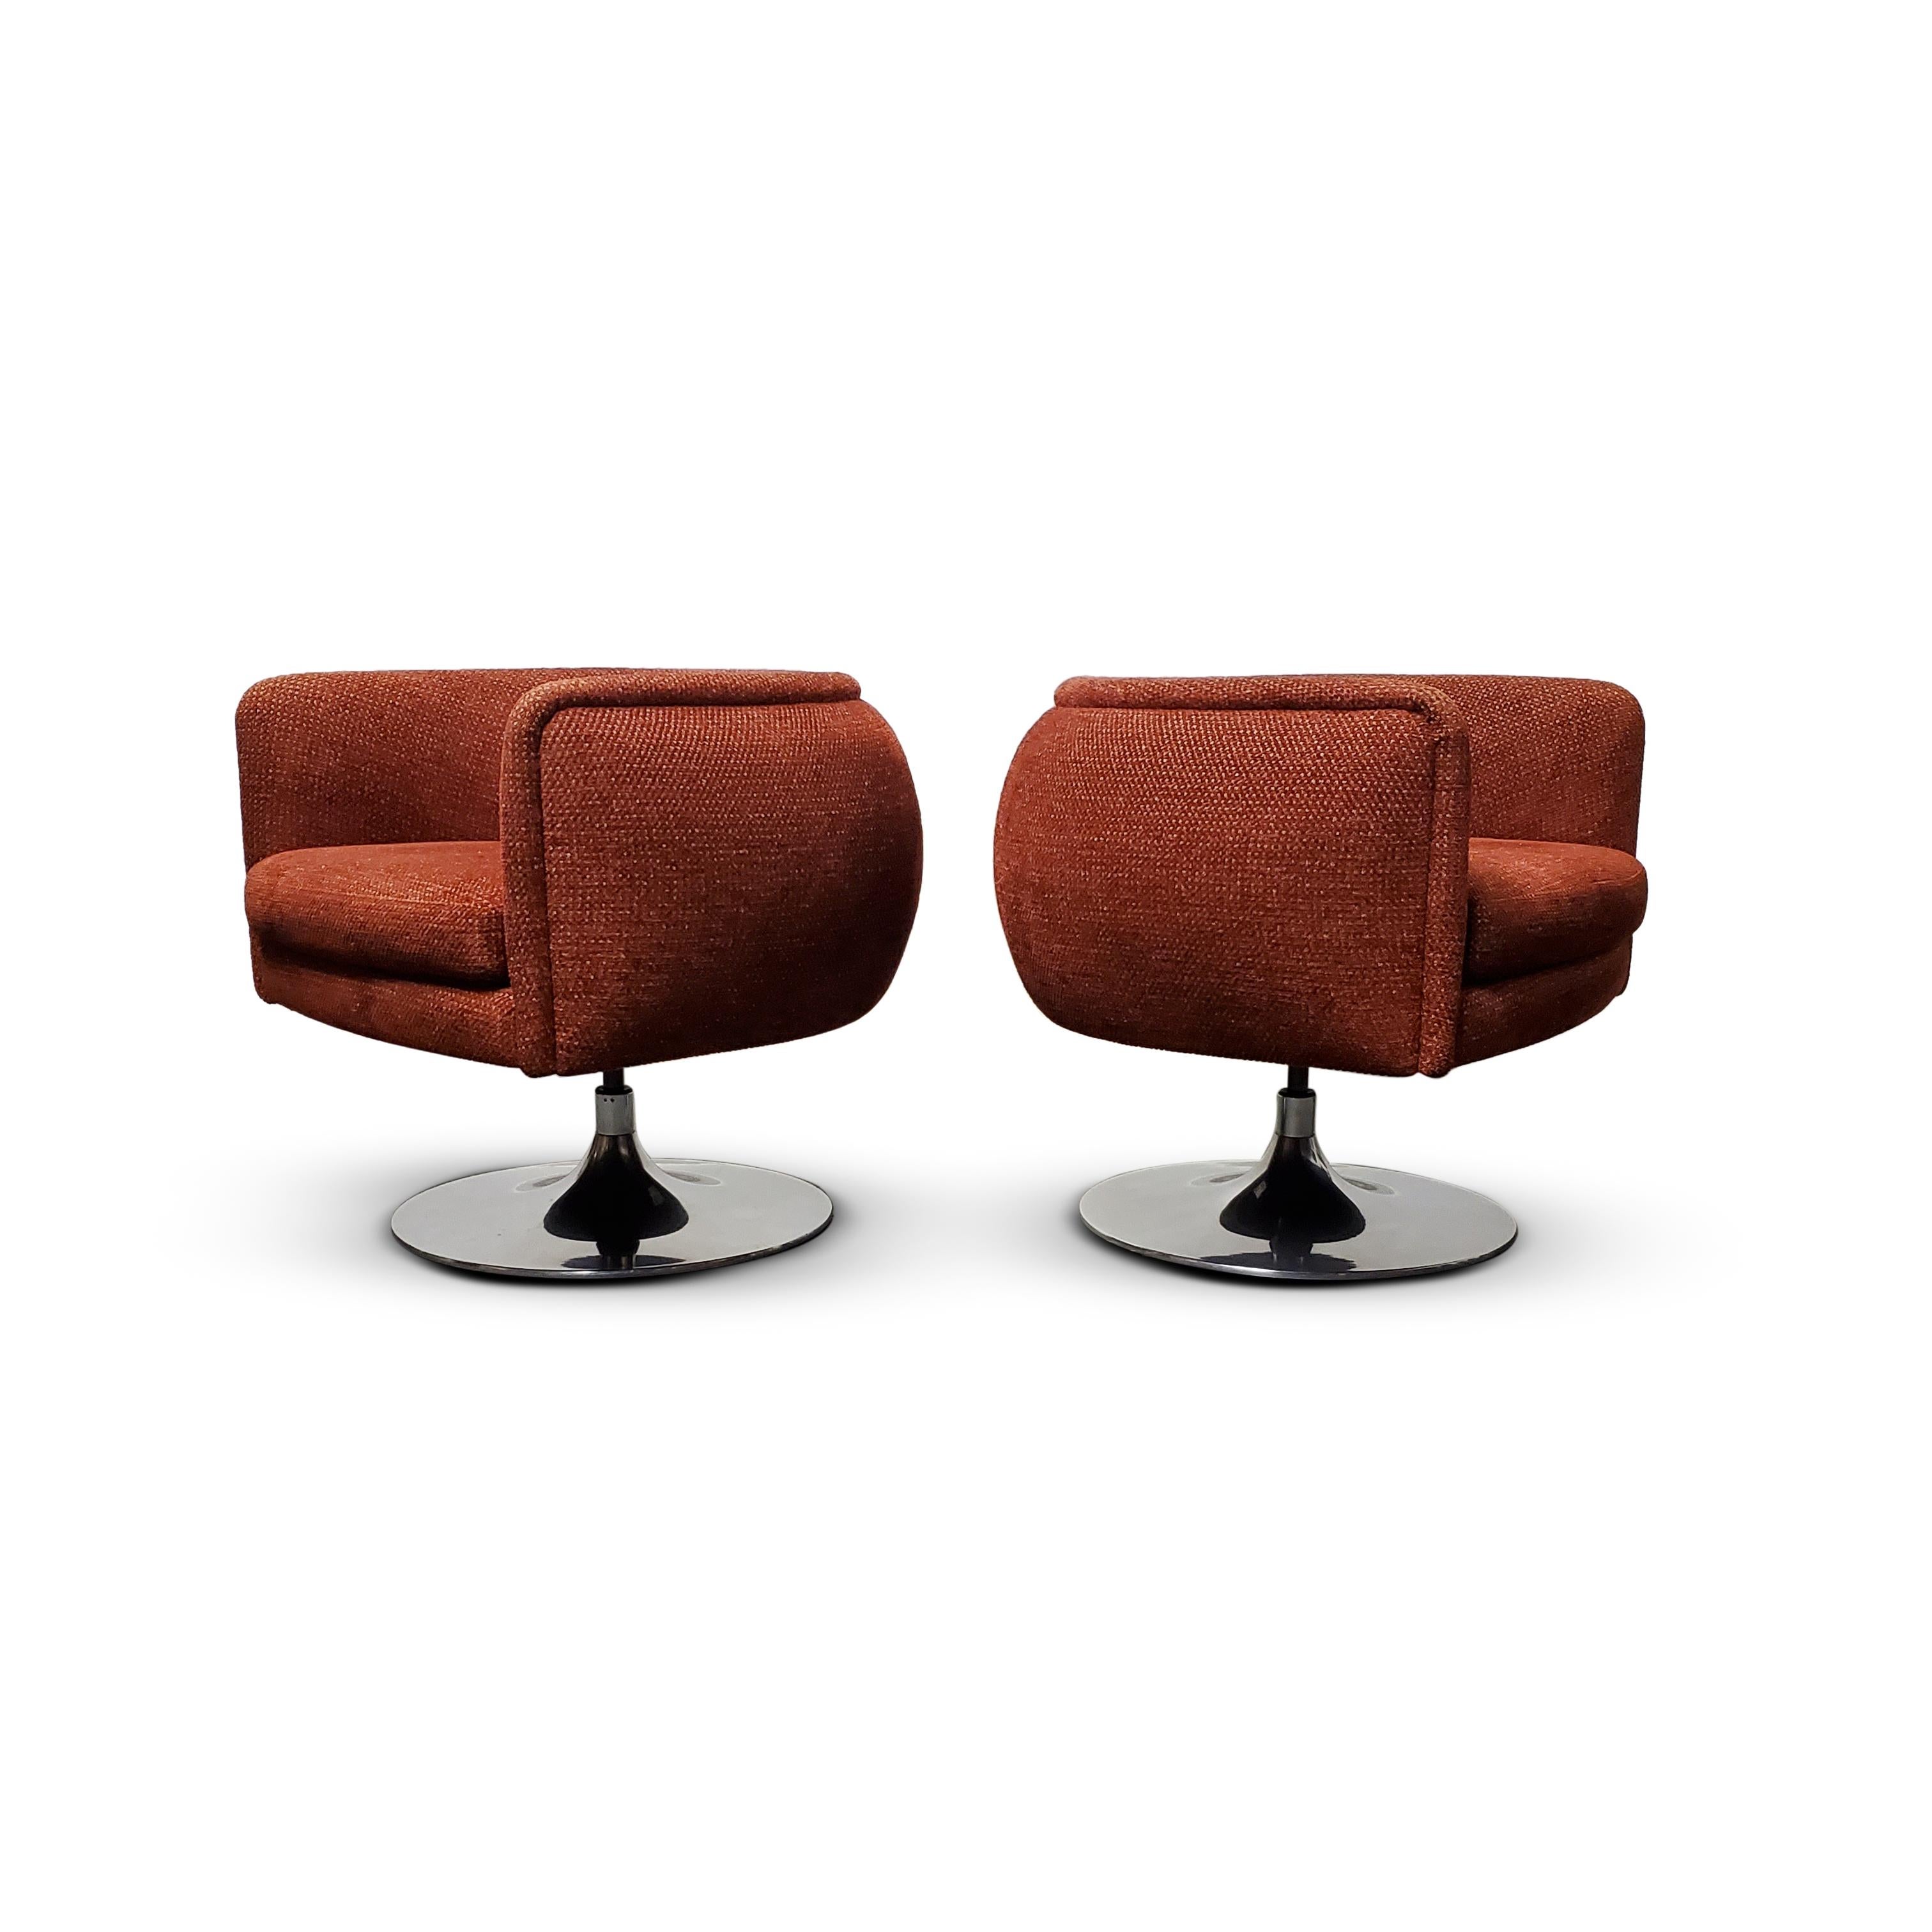 Pair of Knoll D'Urso swivel lounge chairs.